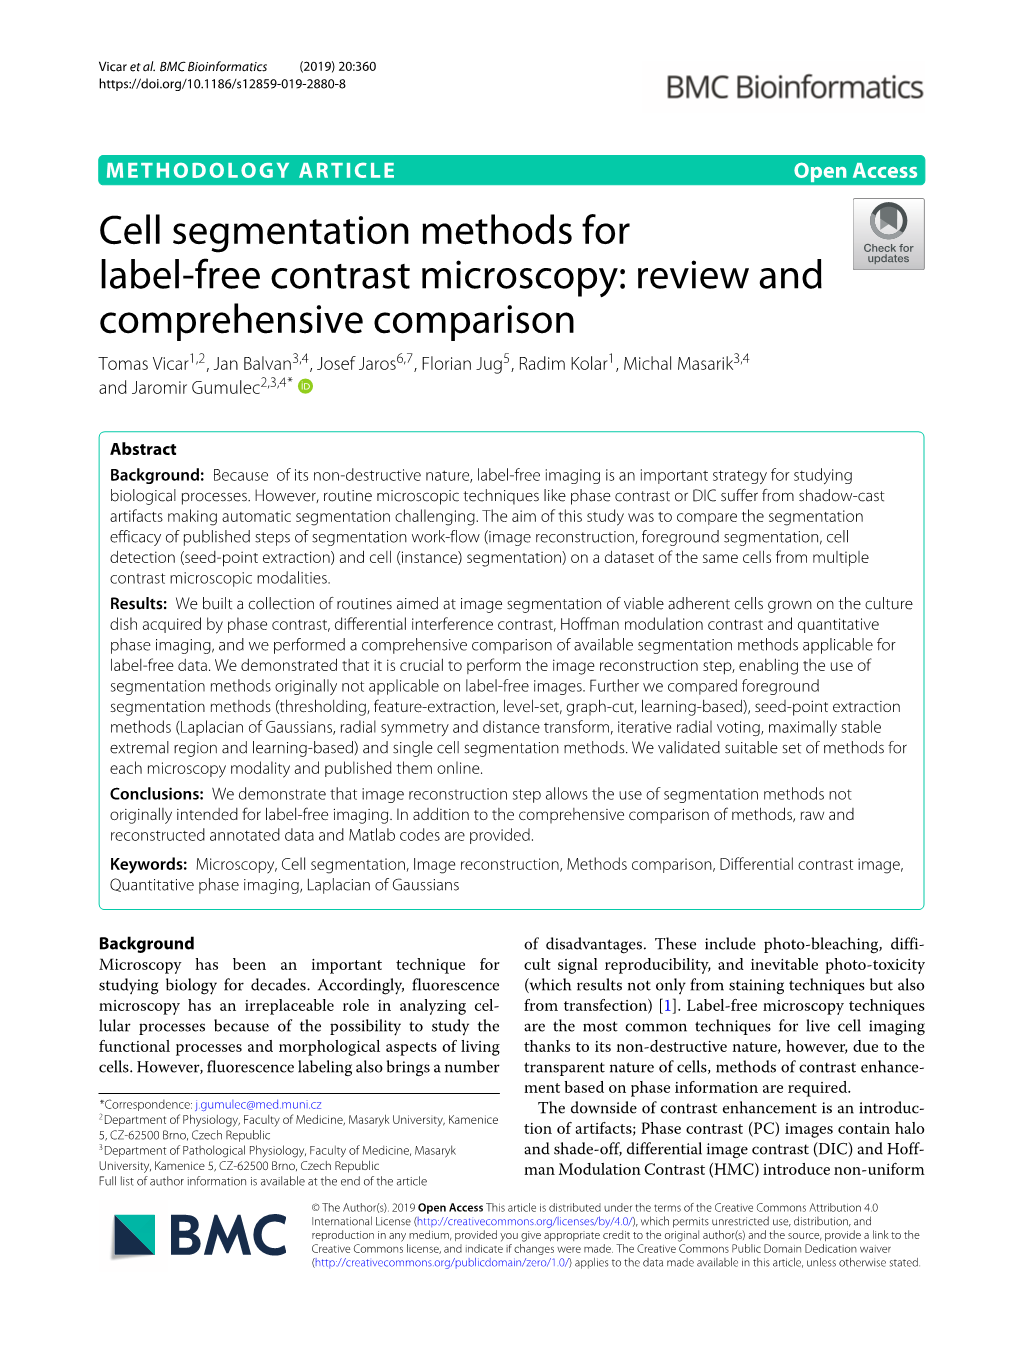 Cell Segmentation Methods for Label-Free Contrast Microscopy